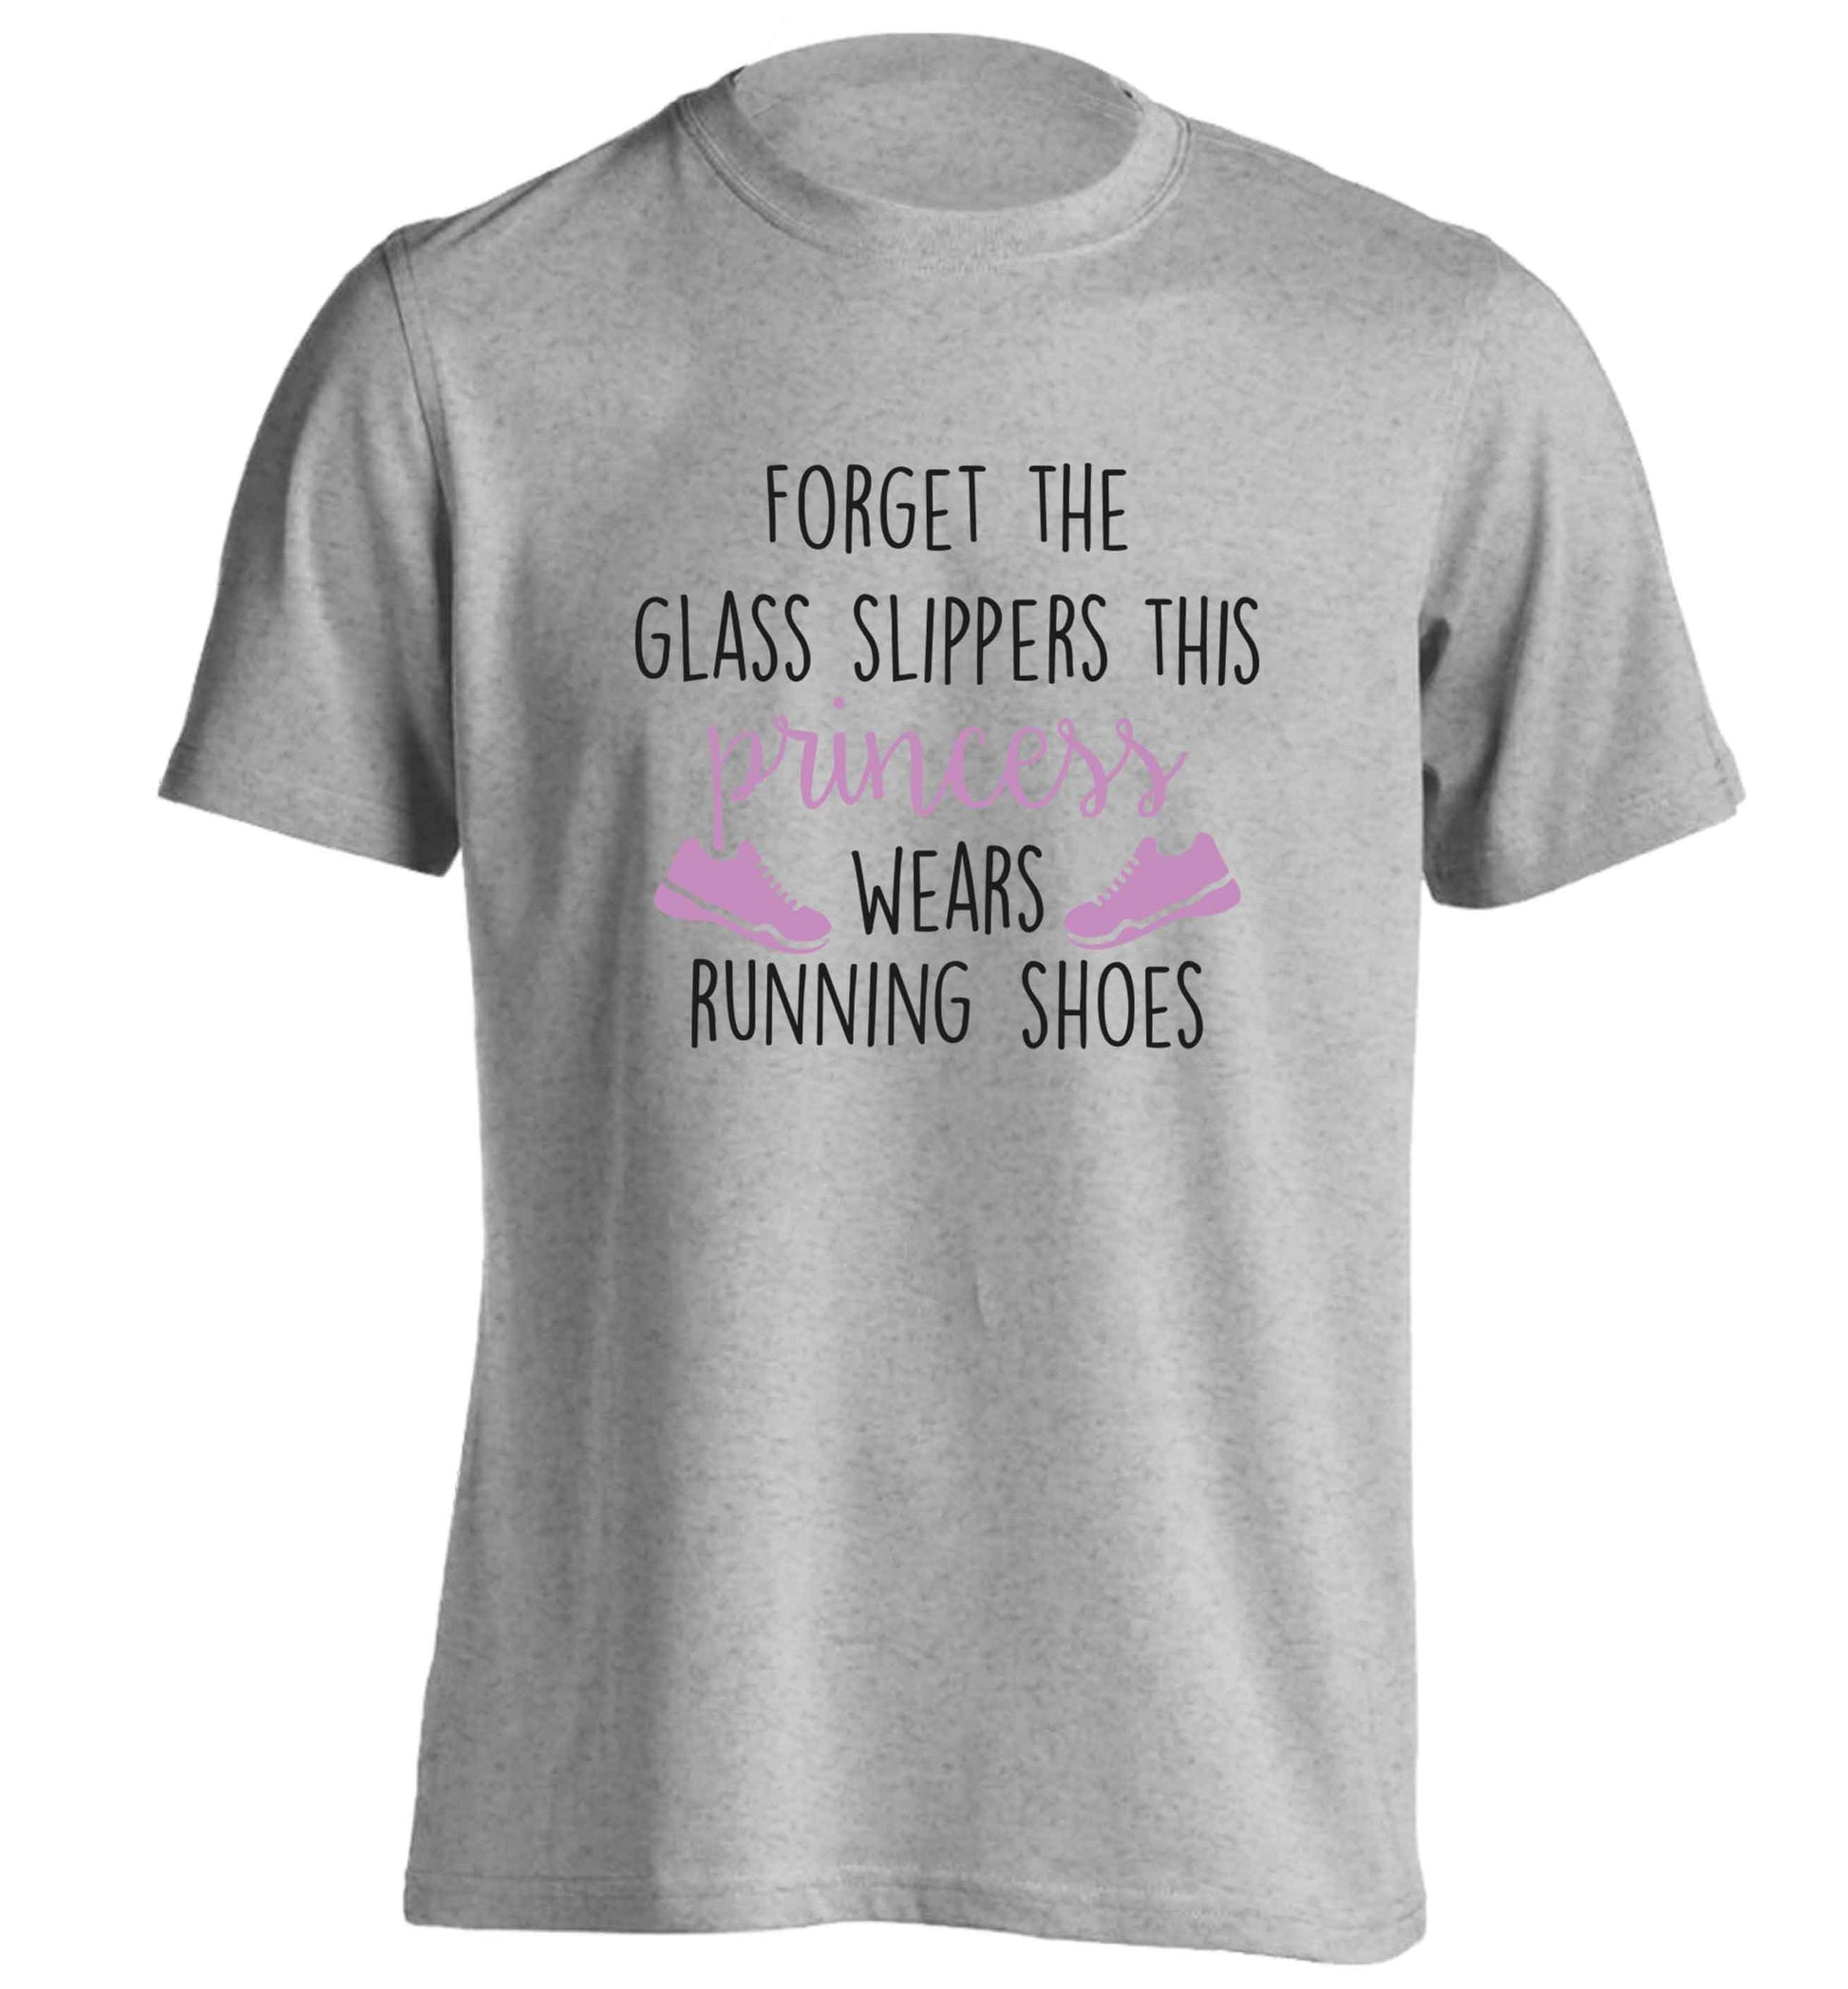 Forget the glass slippers this princess wears running shoes adults unisex grey Tshirt 2XL